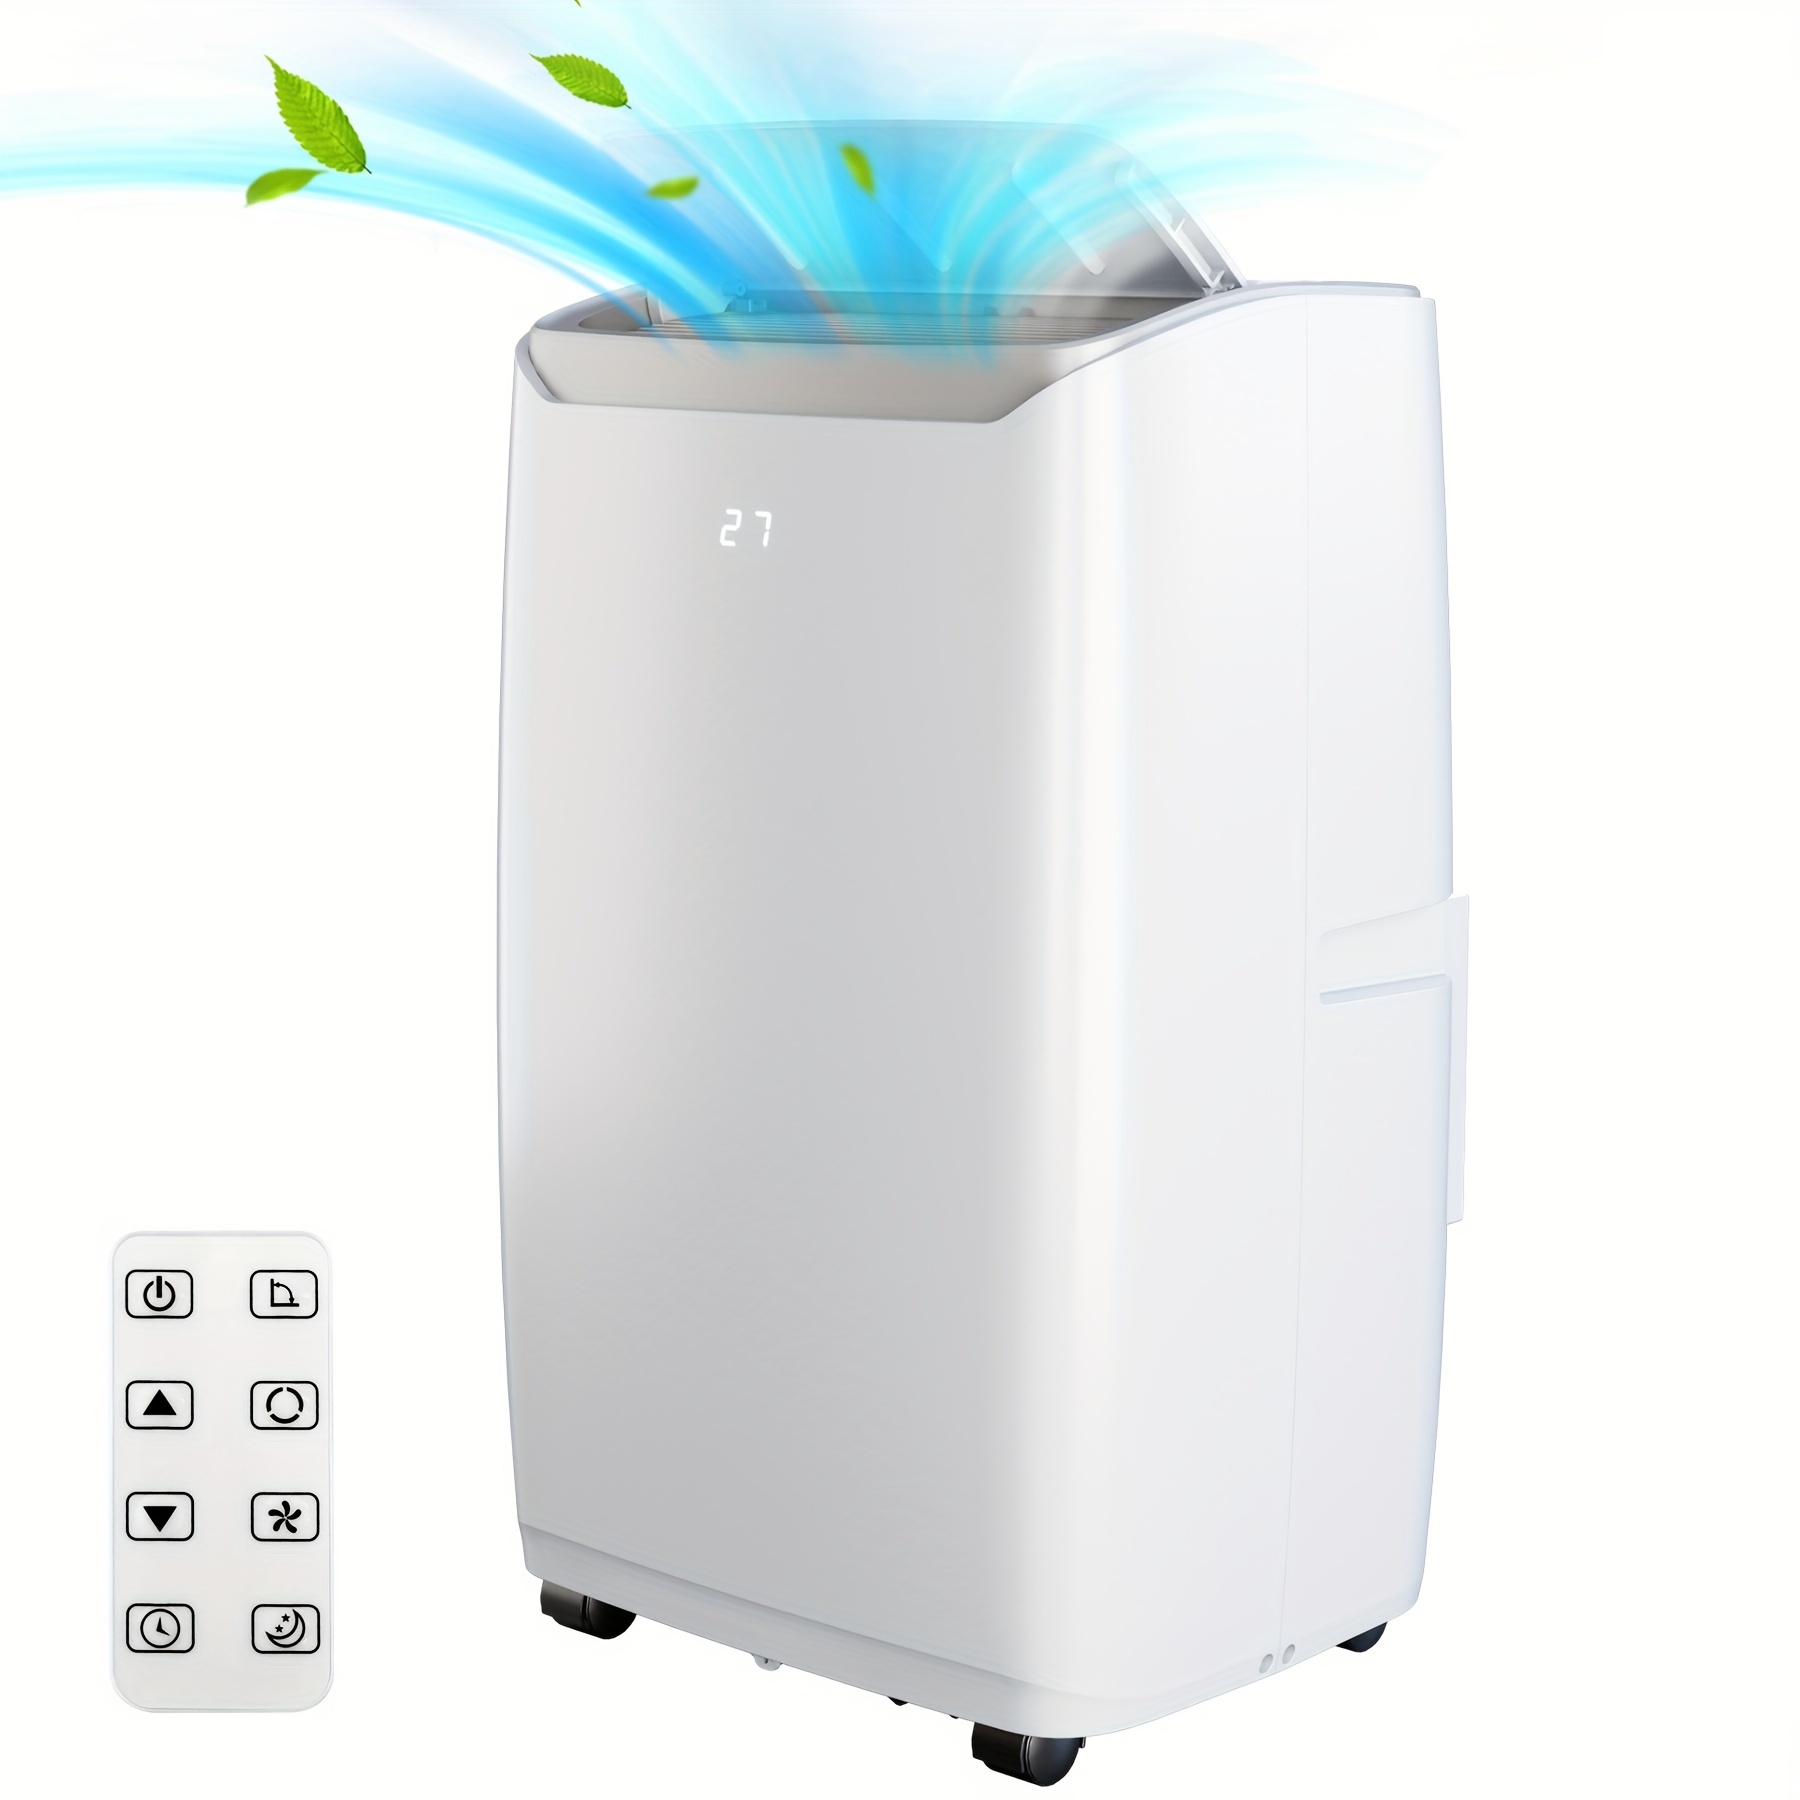 

Portable Room Air Conditioners, 12, 000 Btu With Multi-speed Fan, Dehumidifier Mode, Easy-to-clean Washable Filter, White